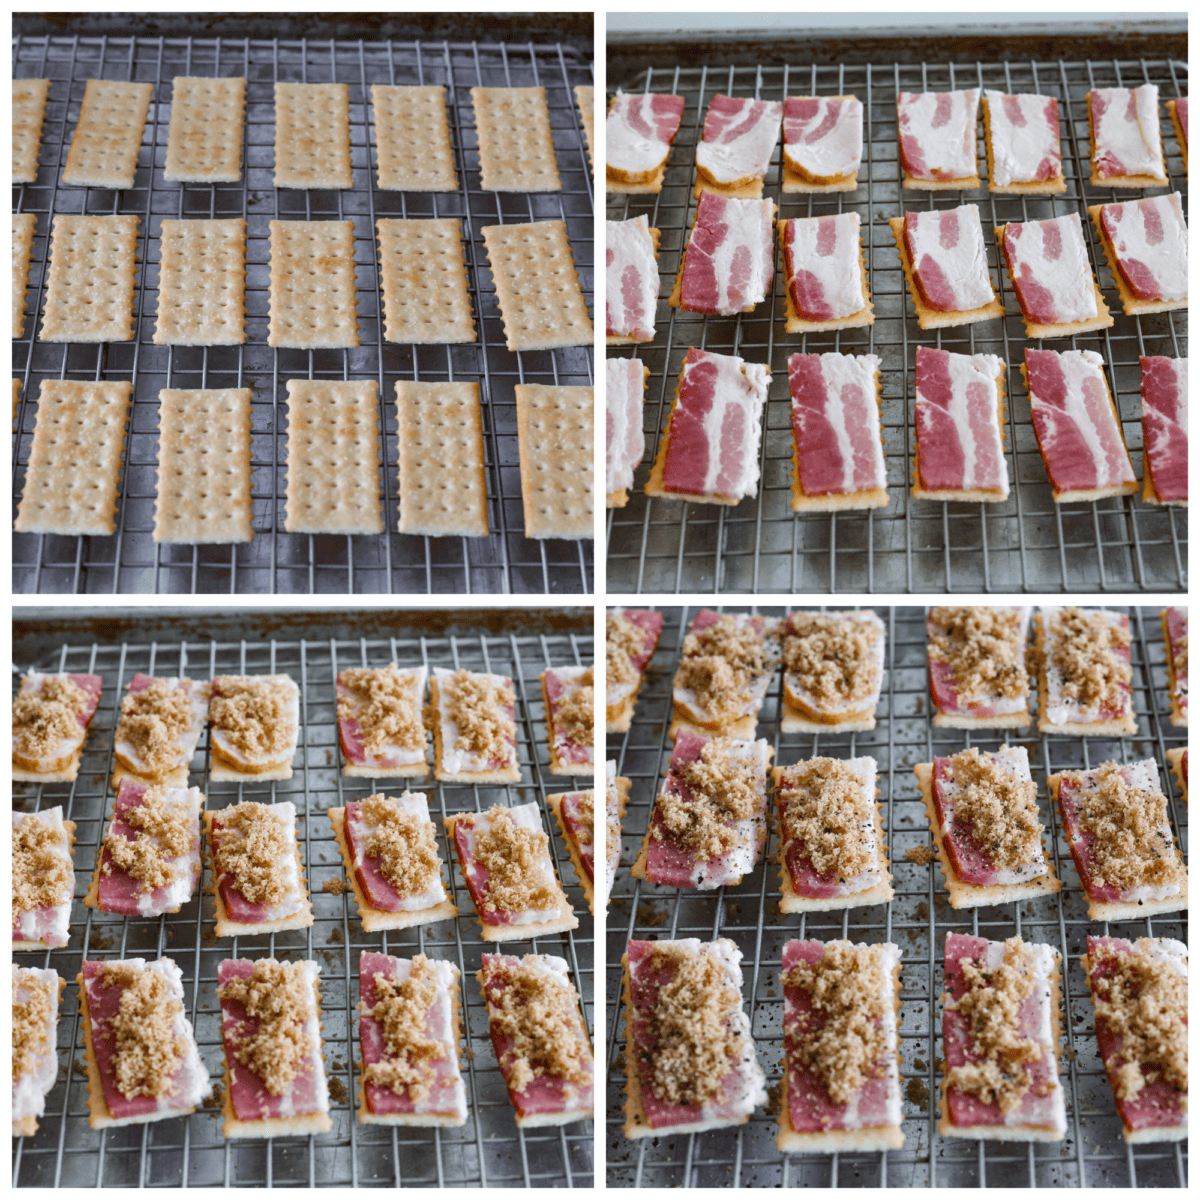 First process photo of crackers lined on a baking rack. Second process photo of the bacon placed on top of the crackers. Third process photo of the brown sugar sprinkled on the bacon. Fourth process photo of pepper sprinkled on top.